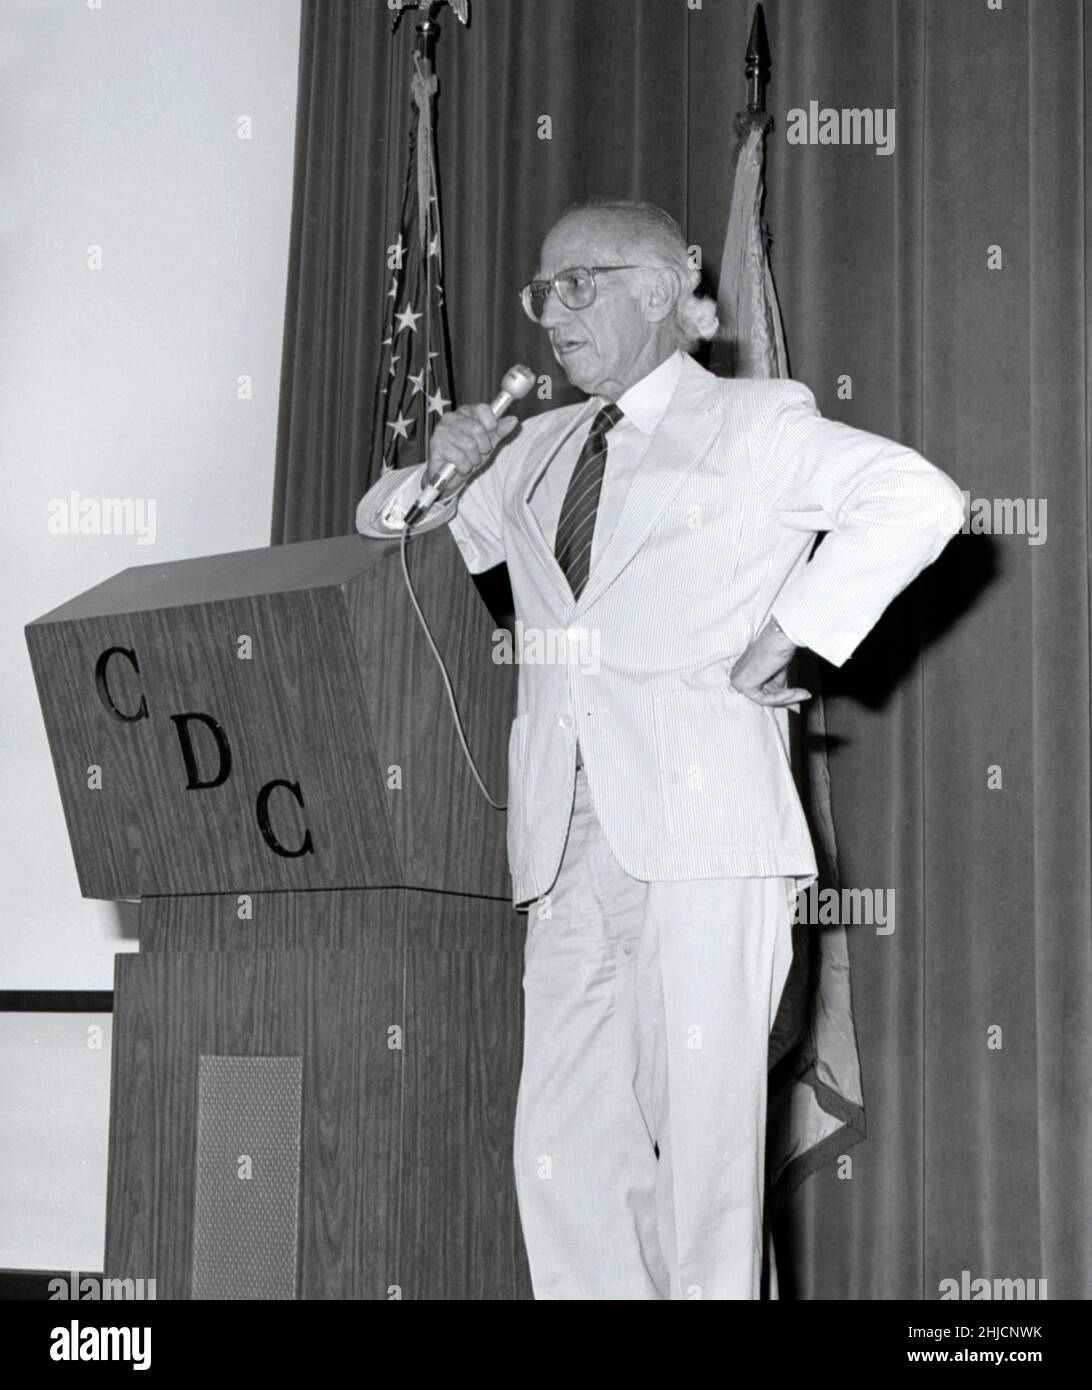 This photograph shows Dr. Jonas Salk (left), creator of the first polio vaccine in 1955, during his presentation to the CDC in 1988.  April 12, 2005, marks the 50th anniversary of the announcement that the polio vaccine, developed by Jonas Salk and his team of scientists at the University of Pittsburgh, worked. 'Safe, effective, and potent' were the words used to announce to the world that an effective vaccine had been found against a disease that once paralyzed 13,000--20,000 persons each year in the United States.  1988  / xxxxxx  image storage: xxxxxxxxxxxxx  CD 112 DH/ 041  http://www.cdc. Stock Photo